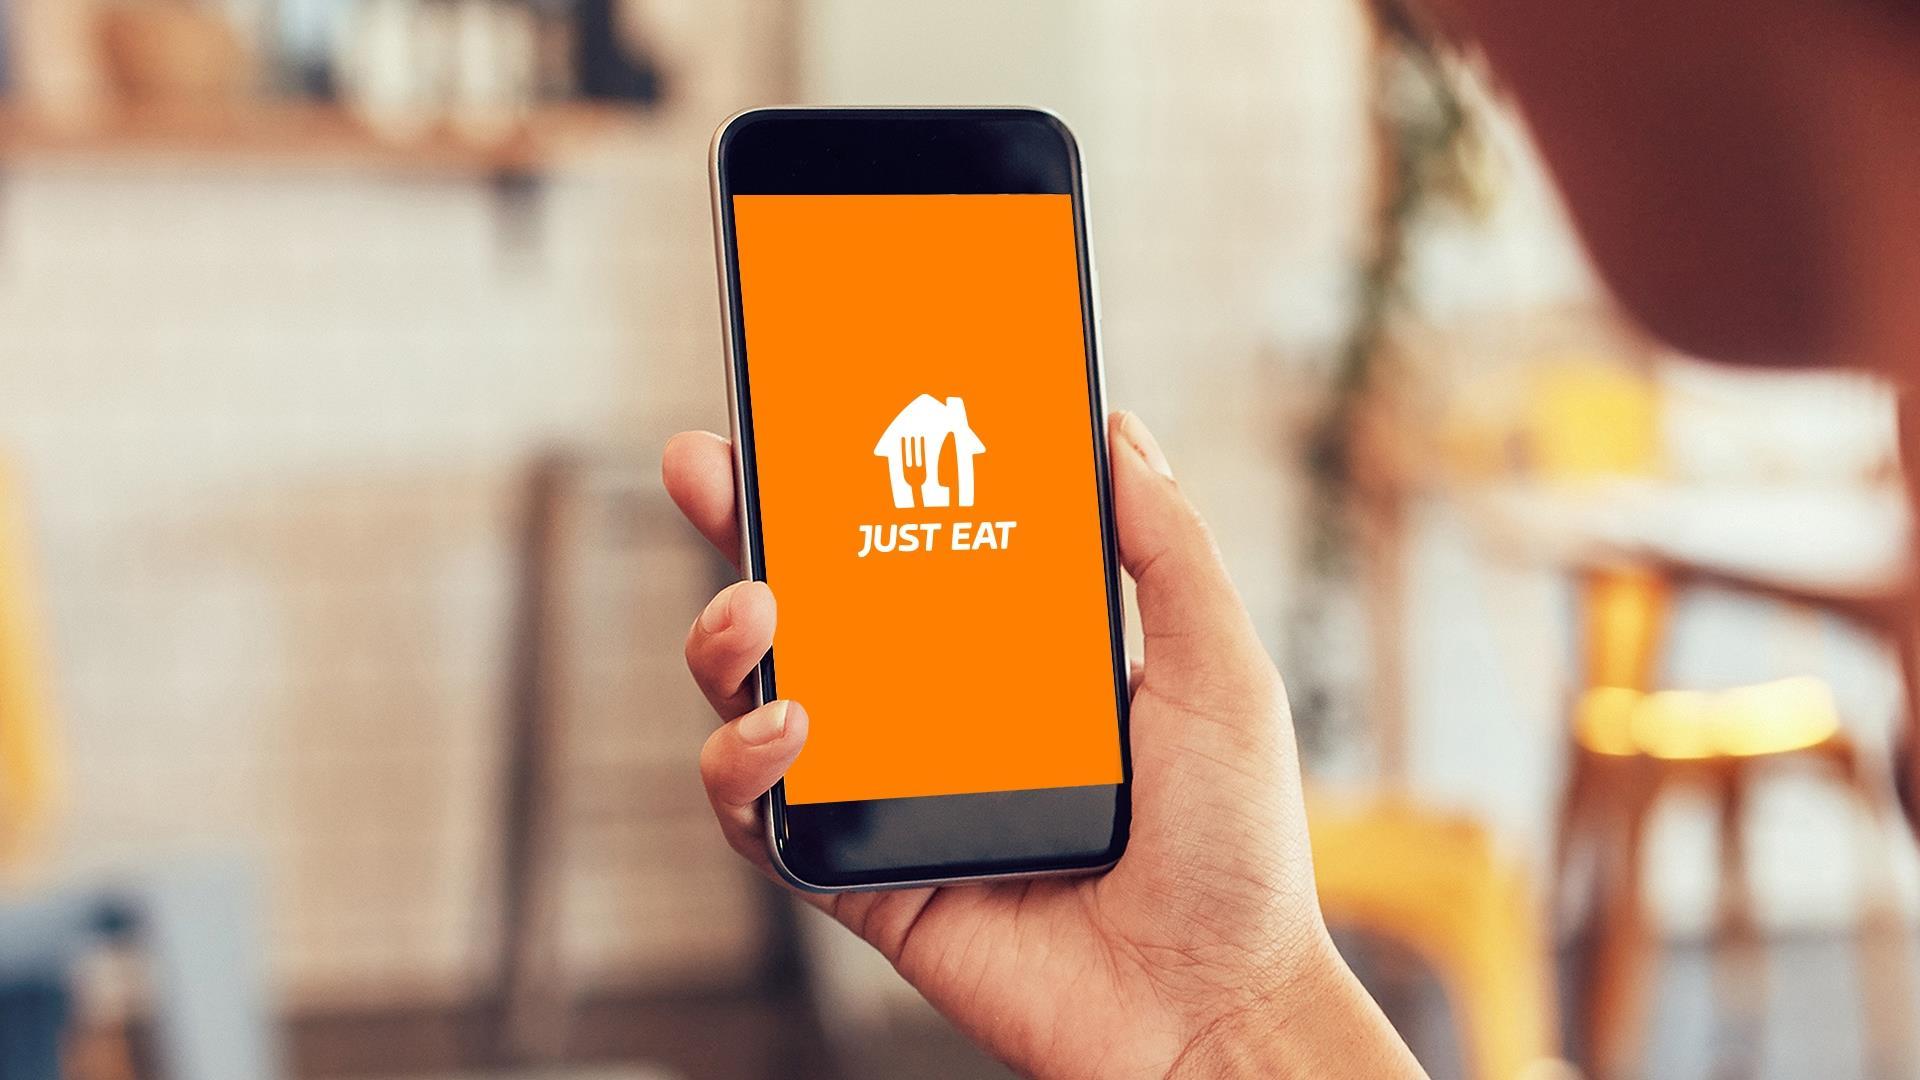 Just Eat to launch AI ordering assistant | News | The Grocer